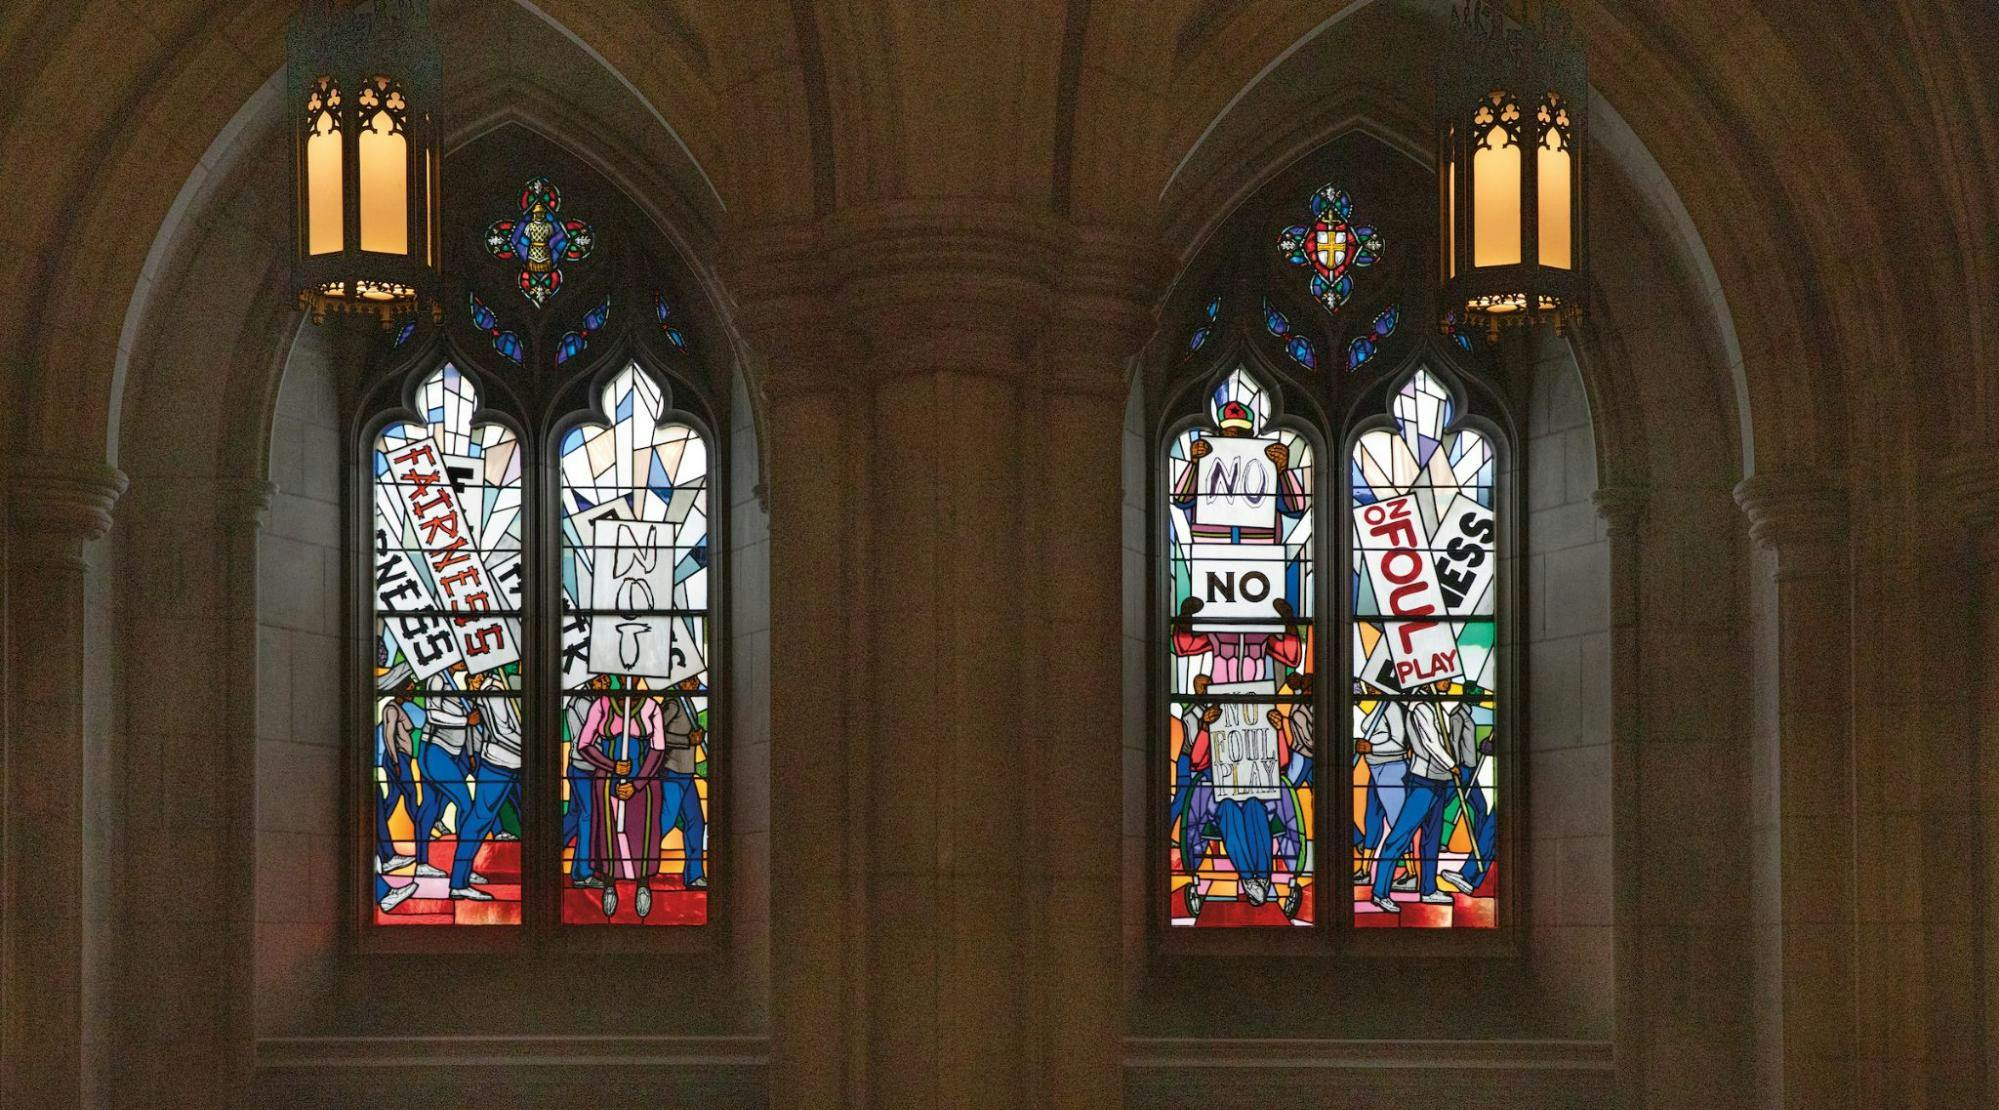 A stained glass installation by Kerry James Marshall, titled "The Now and Forever Windows," dated 2023